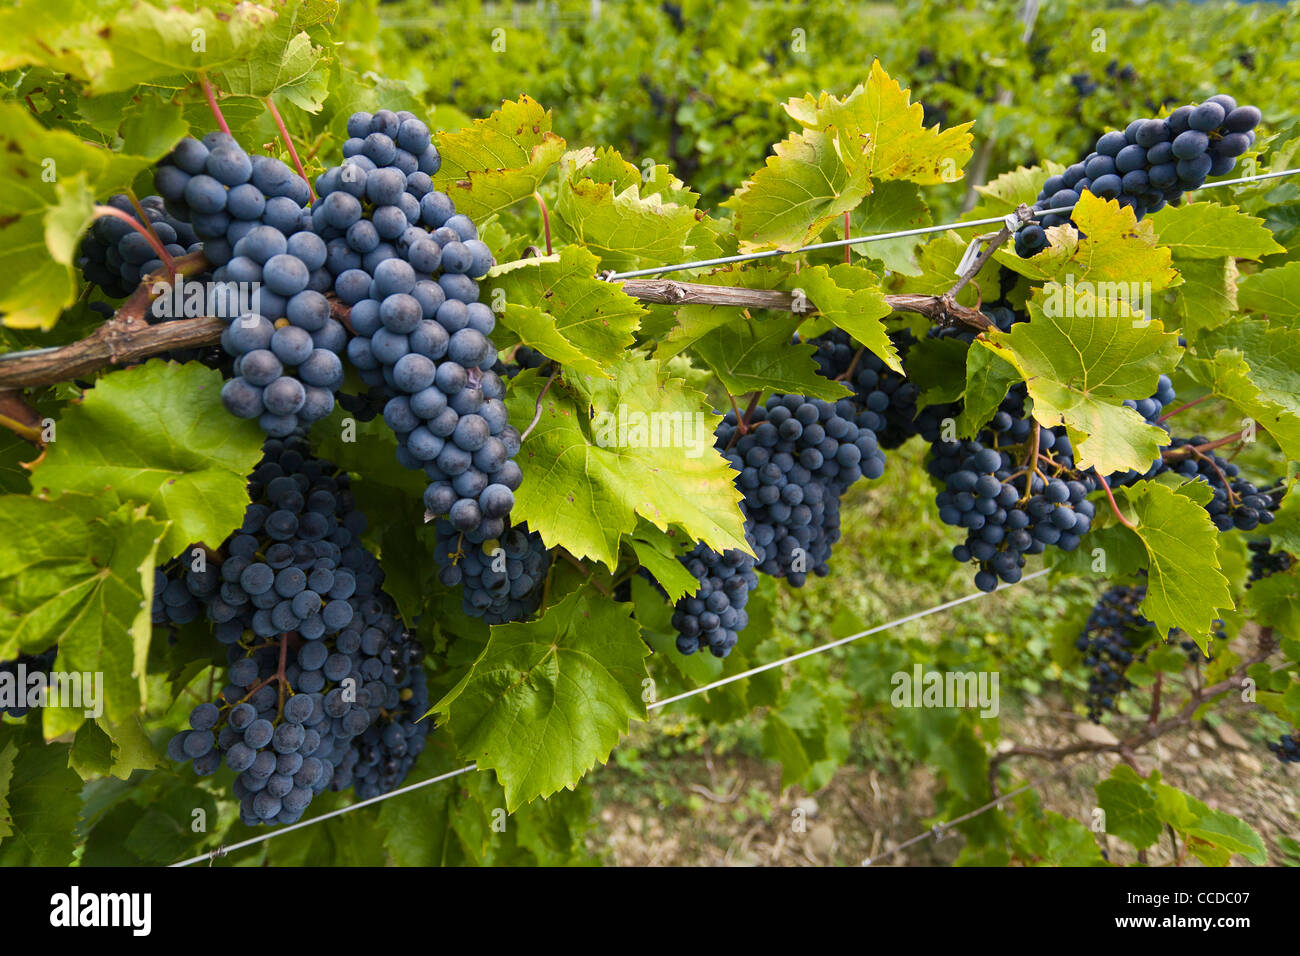 Grapes in vineyard in the Finger Lakes region of New York State Stock Photo